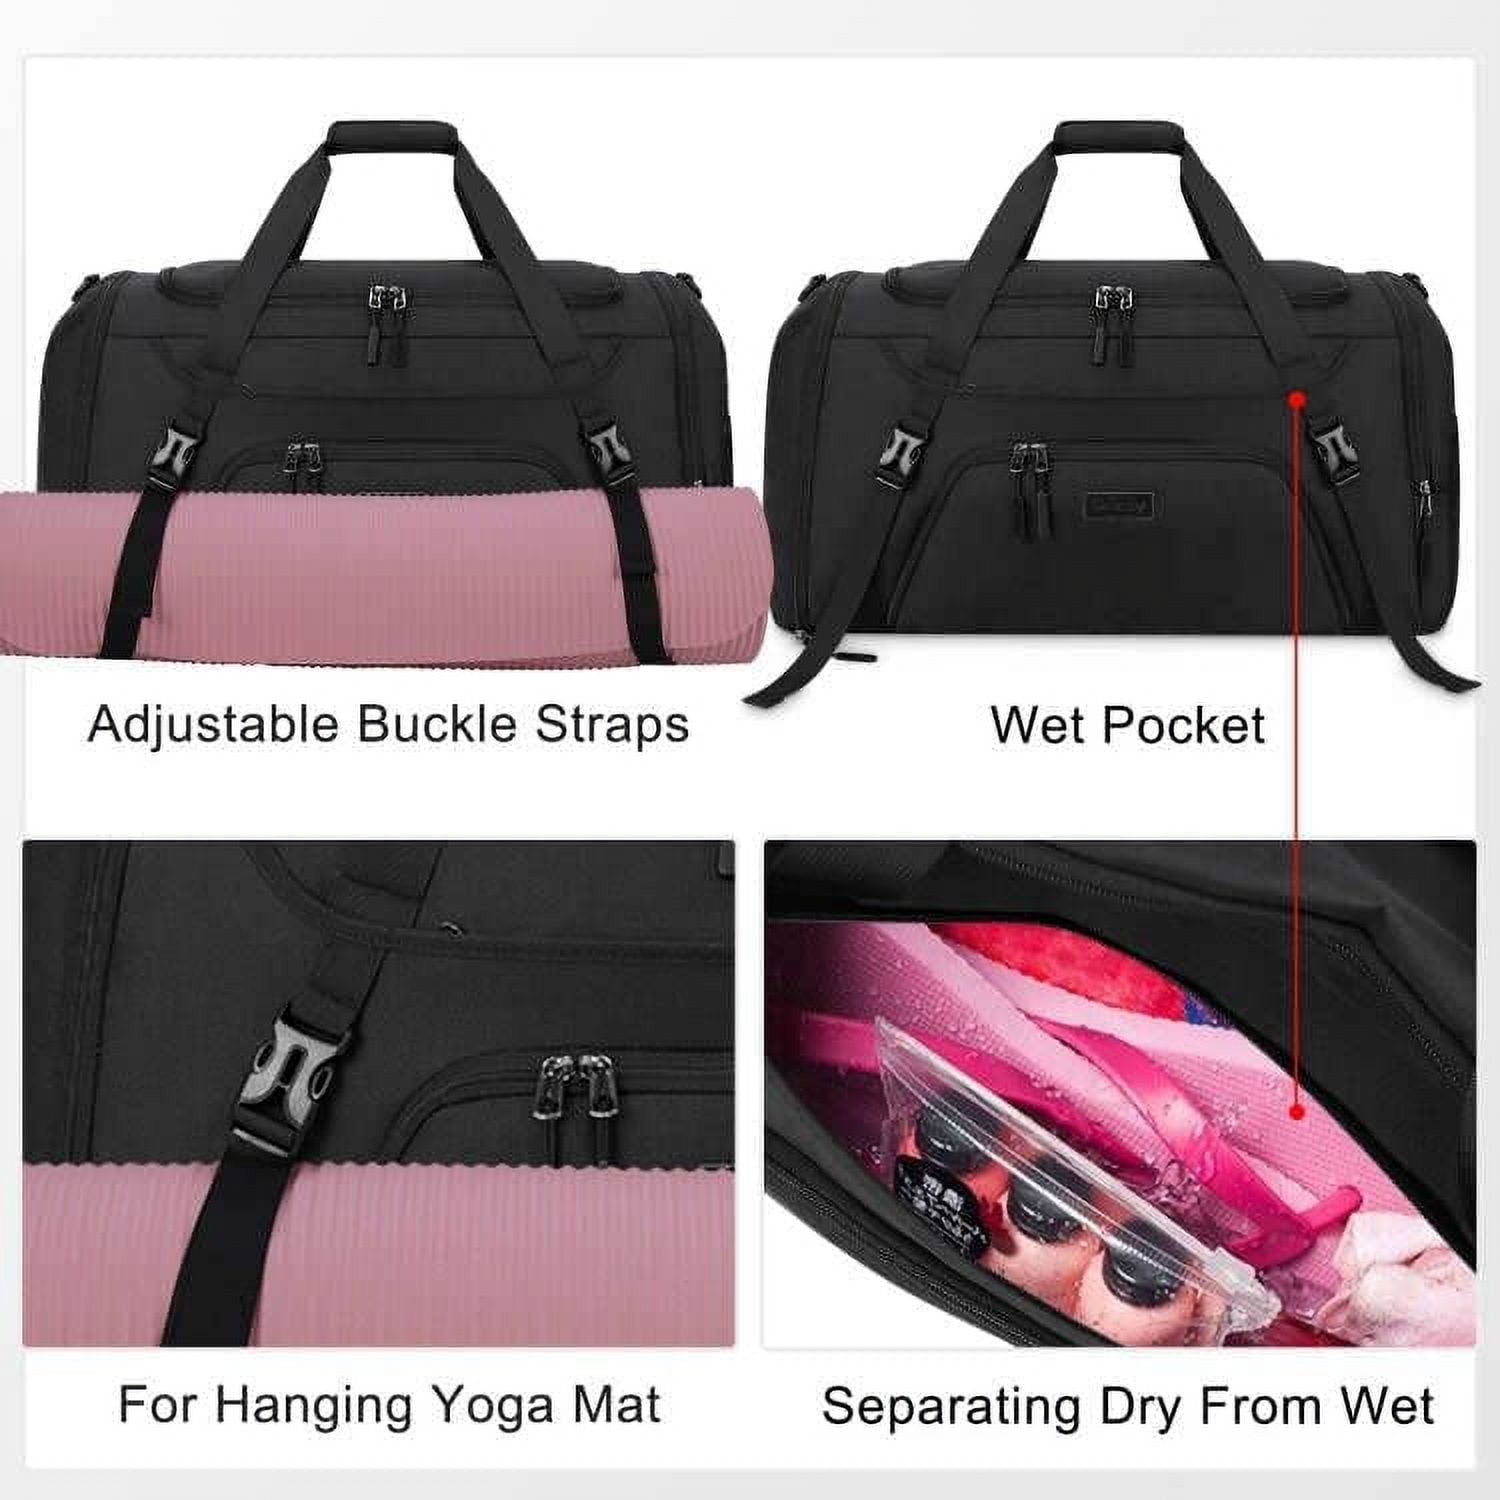 Duffel Bags Yoga Mat Bag With Water Bottle Bag Weekender Overnight Bag With  Shoe Compartment Wet Pocket Travel Duffle Bags From Bag_wallet97, $11.34